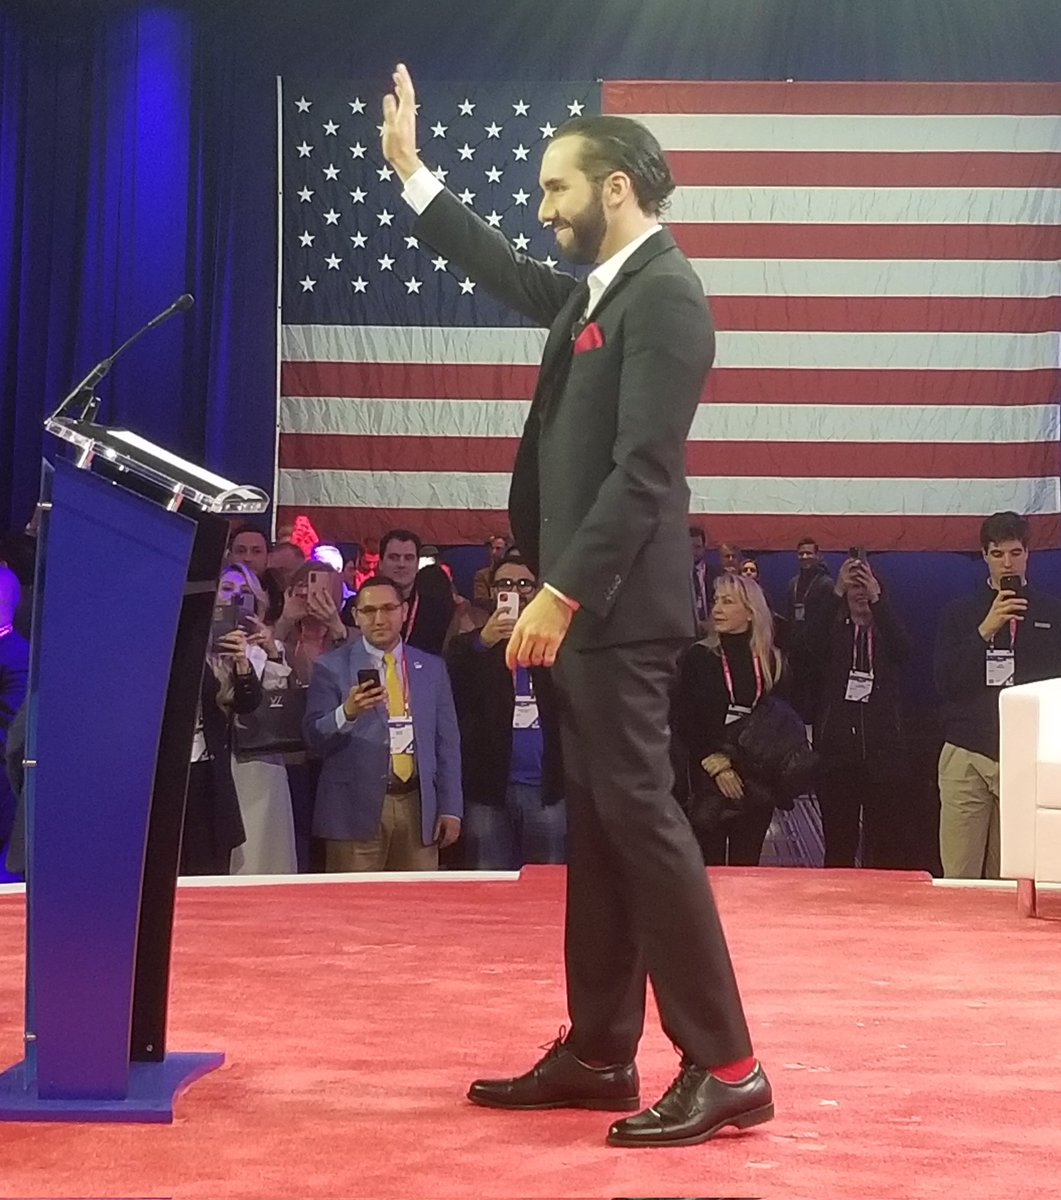 I just witnessed a beautiful thing. @nayibbukele arrived in the garage of the #CPAC event before his speech. Dozens of kitchen staff gathered suddenly in the hallway cheering his name, waving home made signs. They love him because he saved El Salvador from demise. #leadership